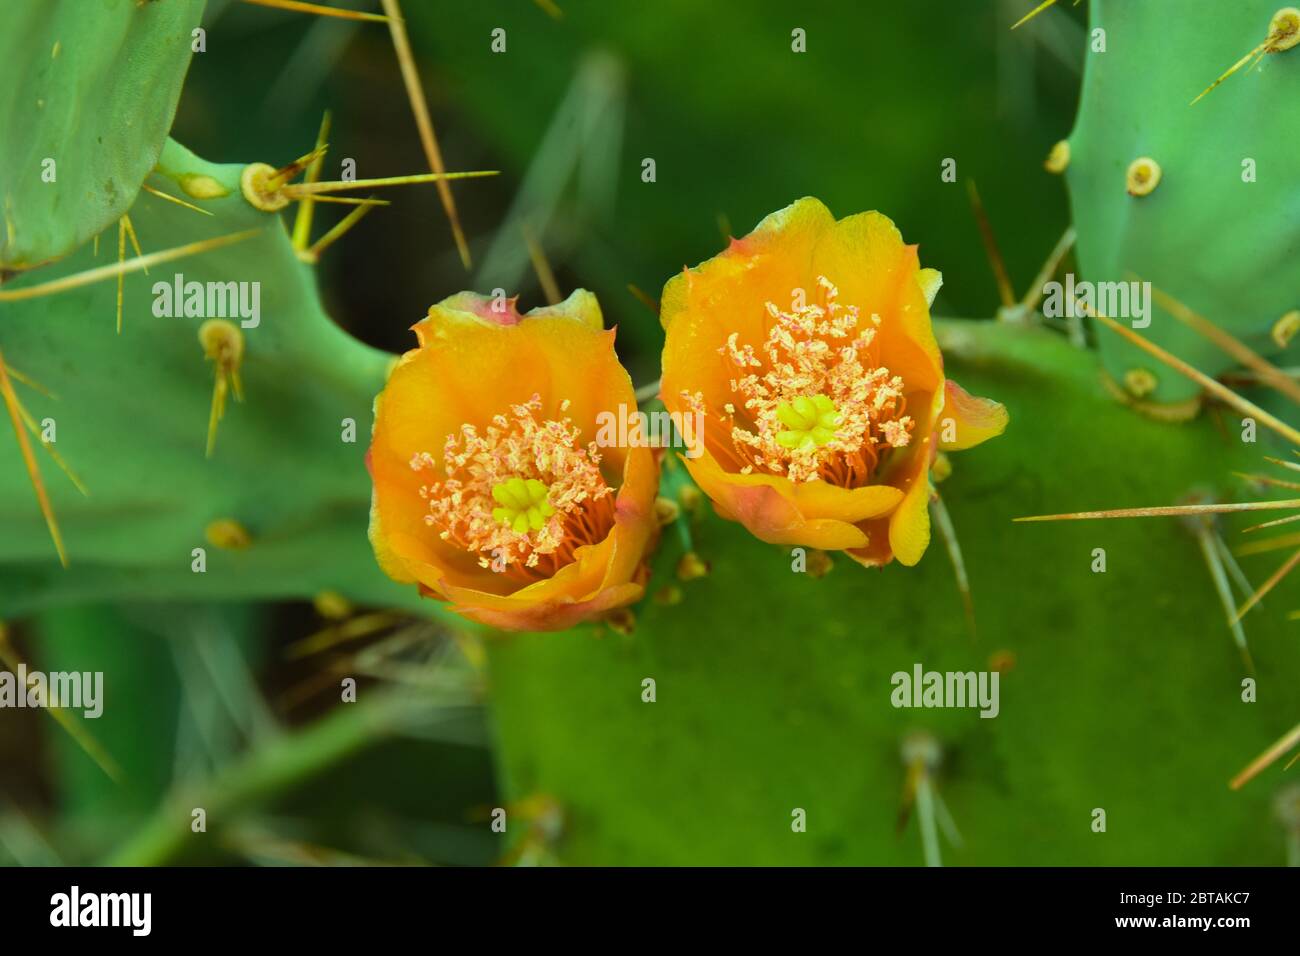 View of a prickly cactus flower in the jungles of Rajasthan Stock Photo